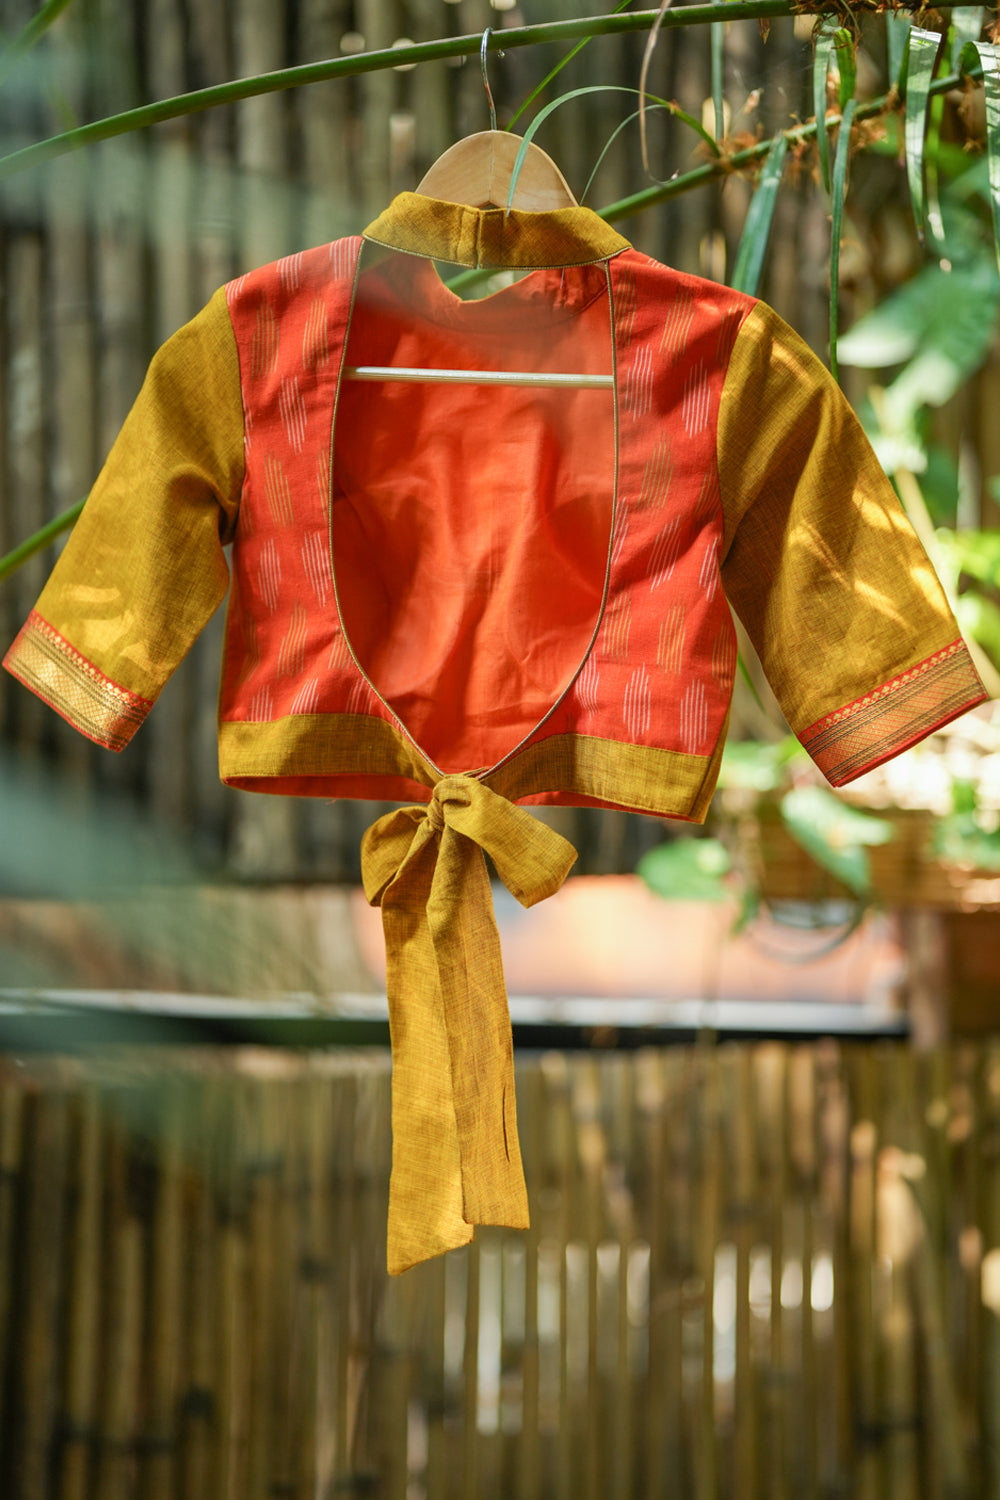 Tangerine and cyber yellow handloom chinese collar blouse with border detailing